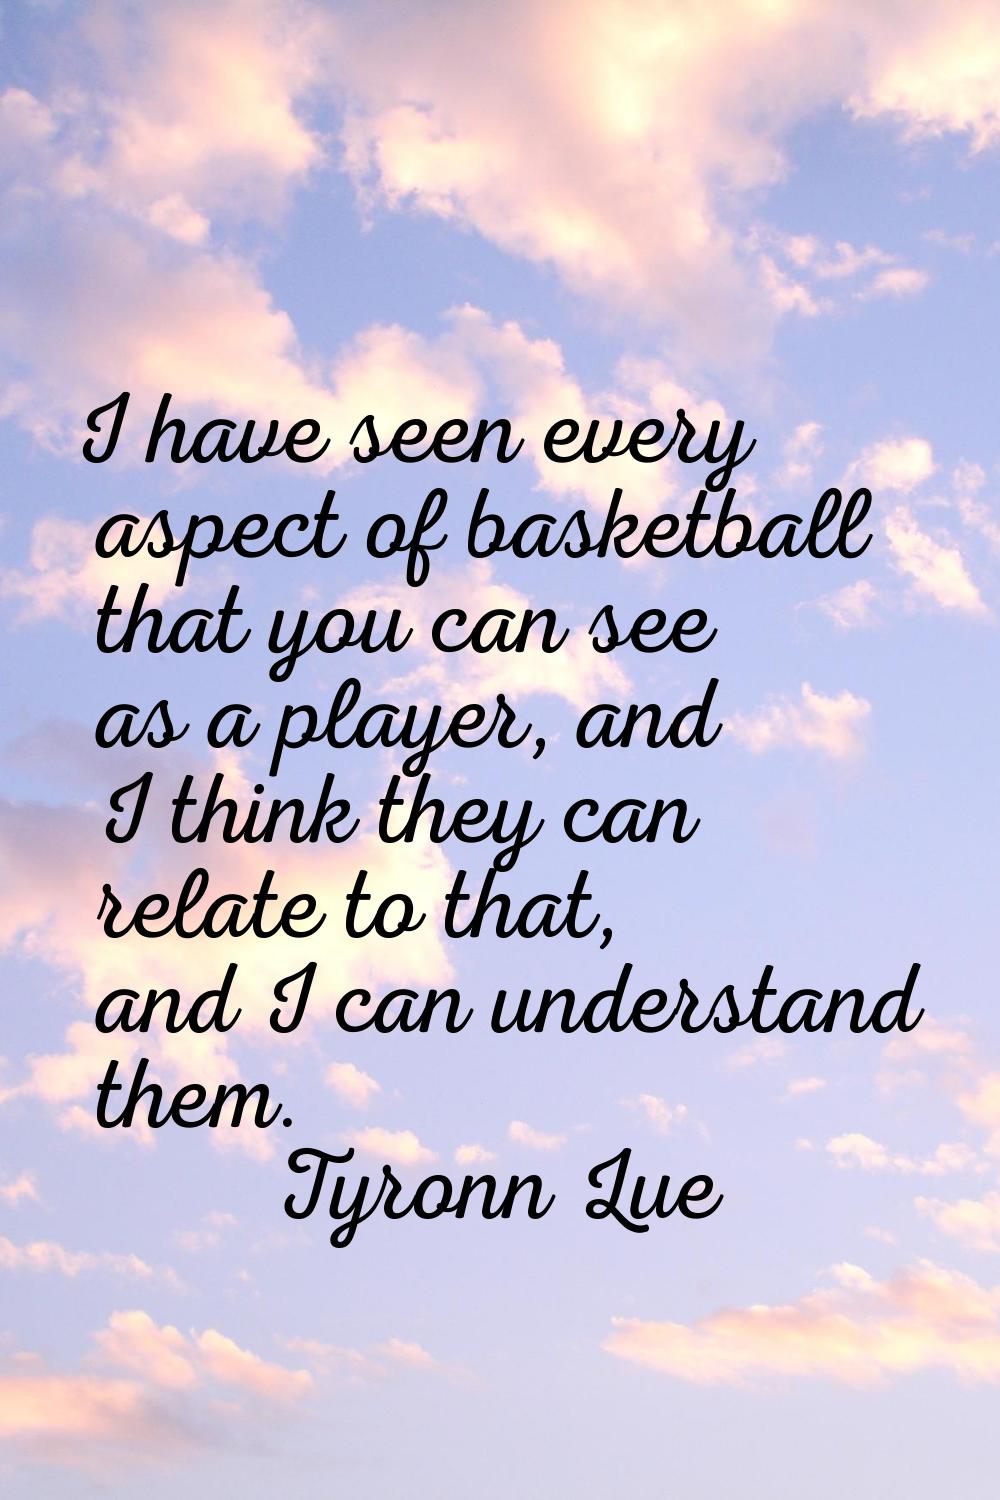 I have seen every aspect of basketball that you can see as a player, and I think they can relate to